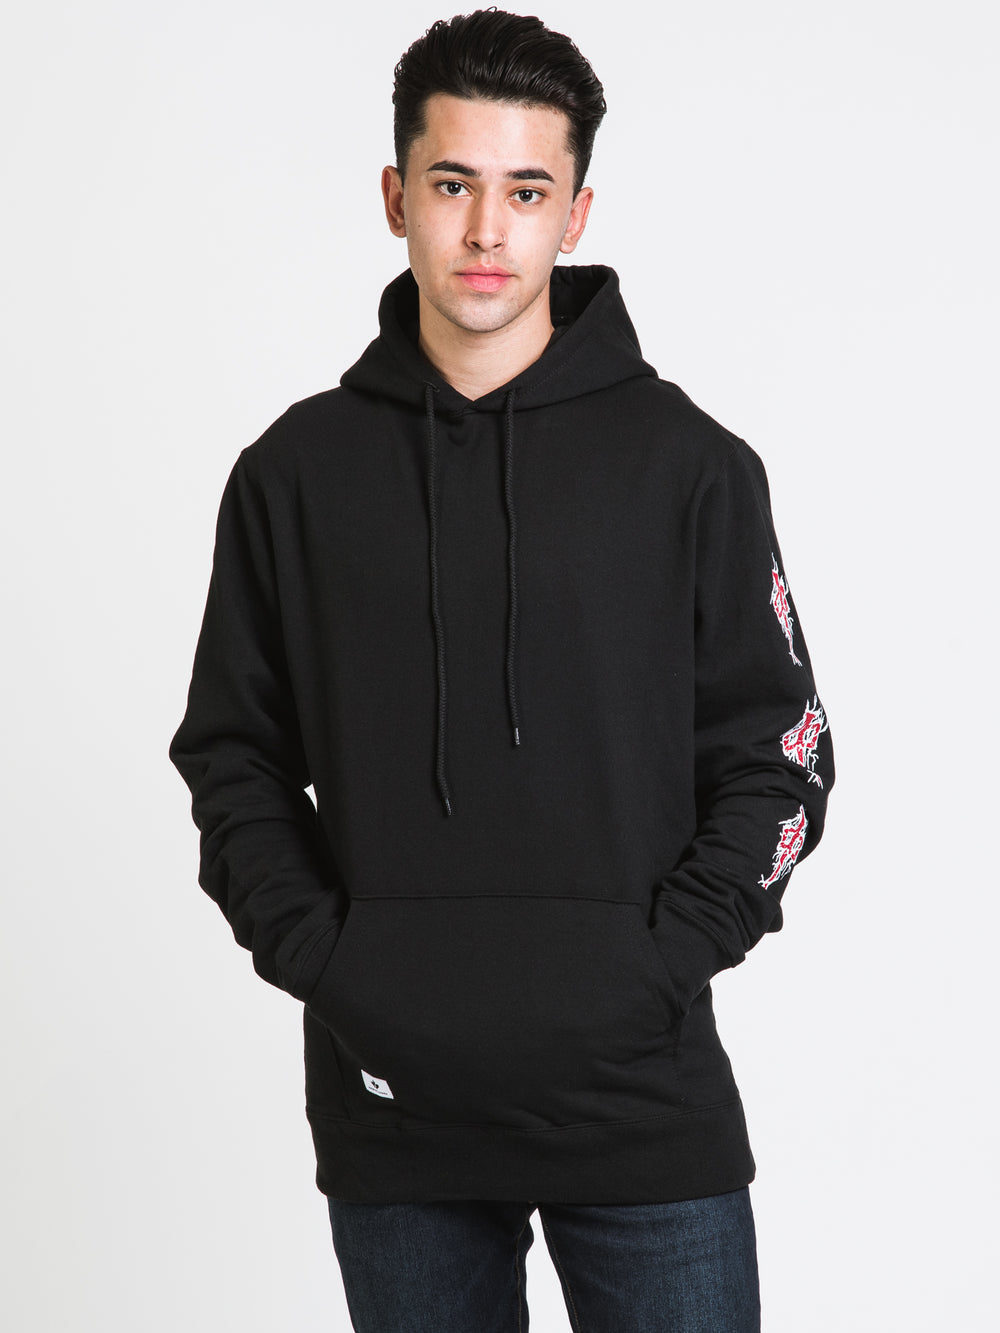 RED DRAGON SPARK PULLOVER HOODIE - CLEARANCE